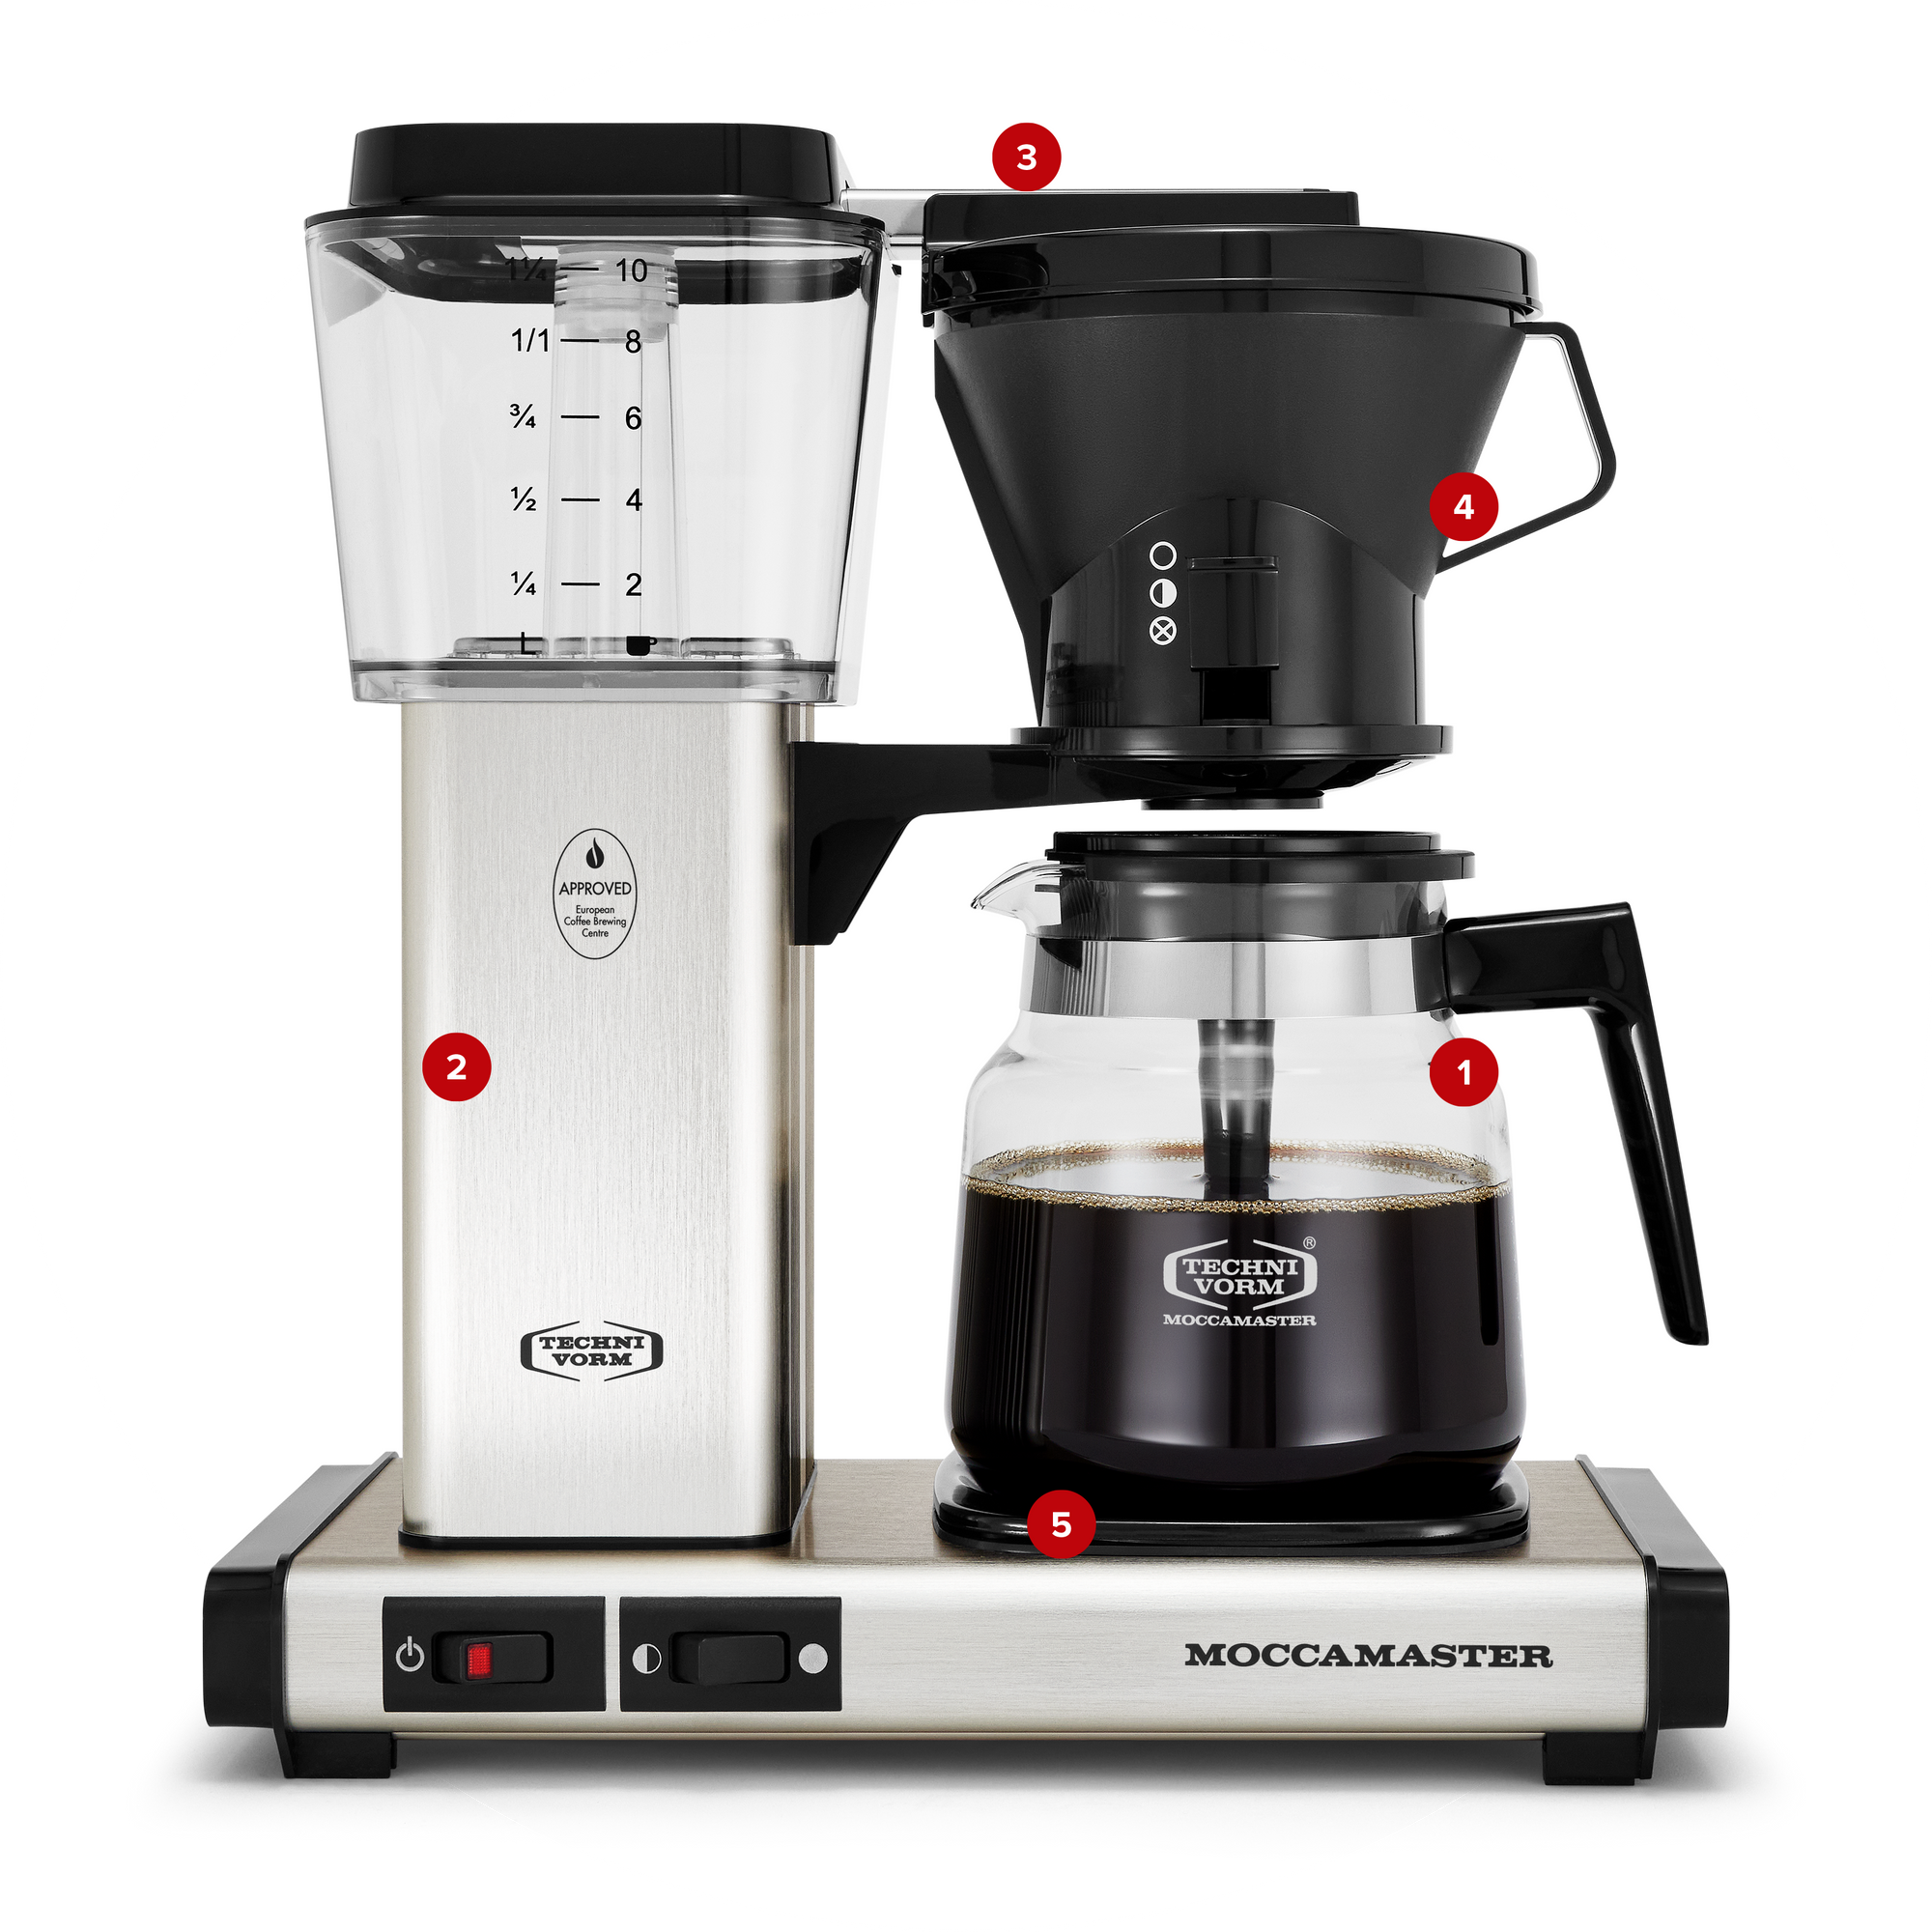 Pour Over Automatic Drip-Stop Coffee Maker: Moccamaster KBGT